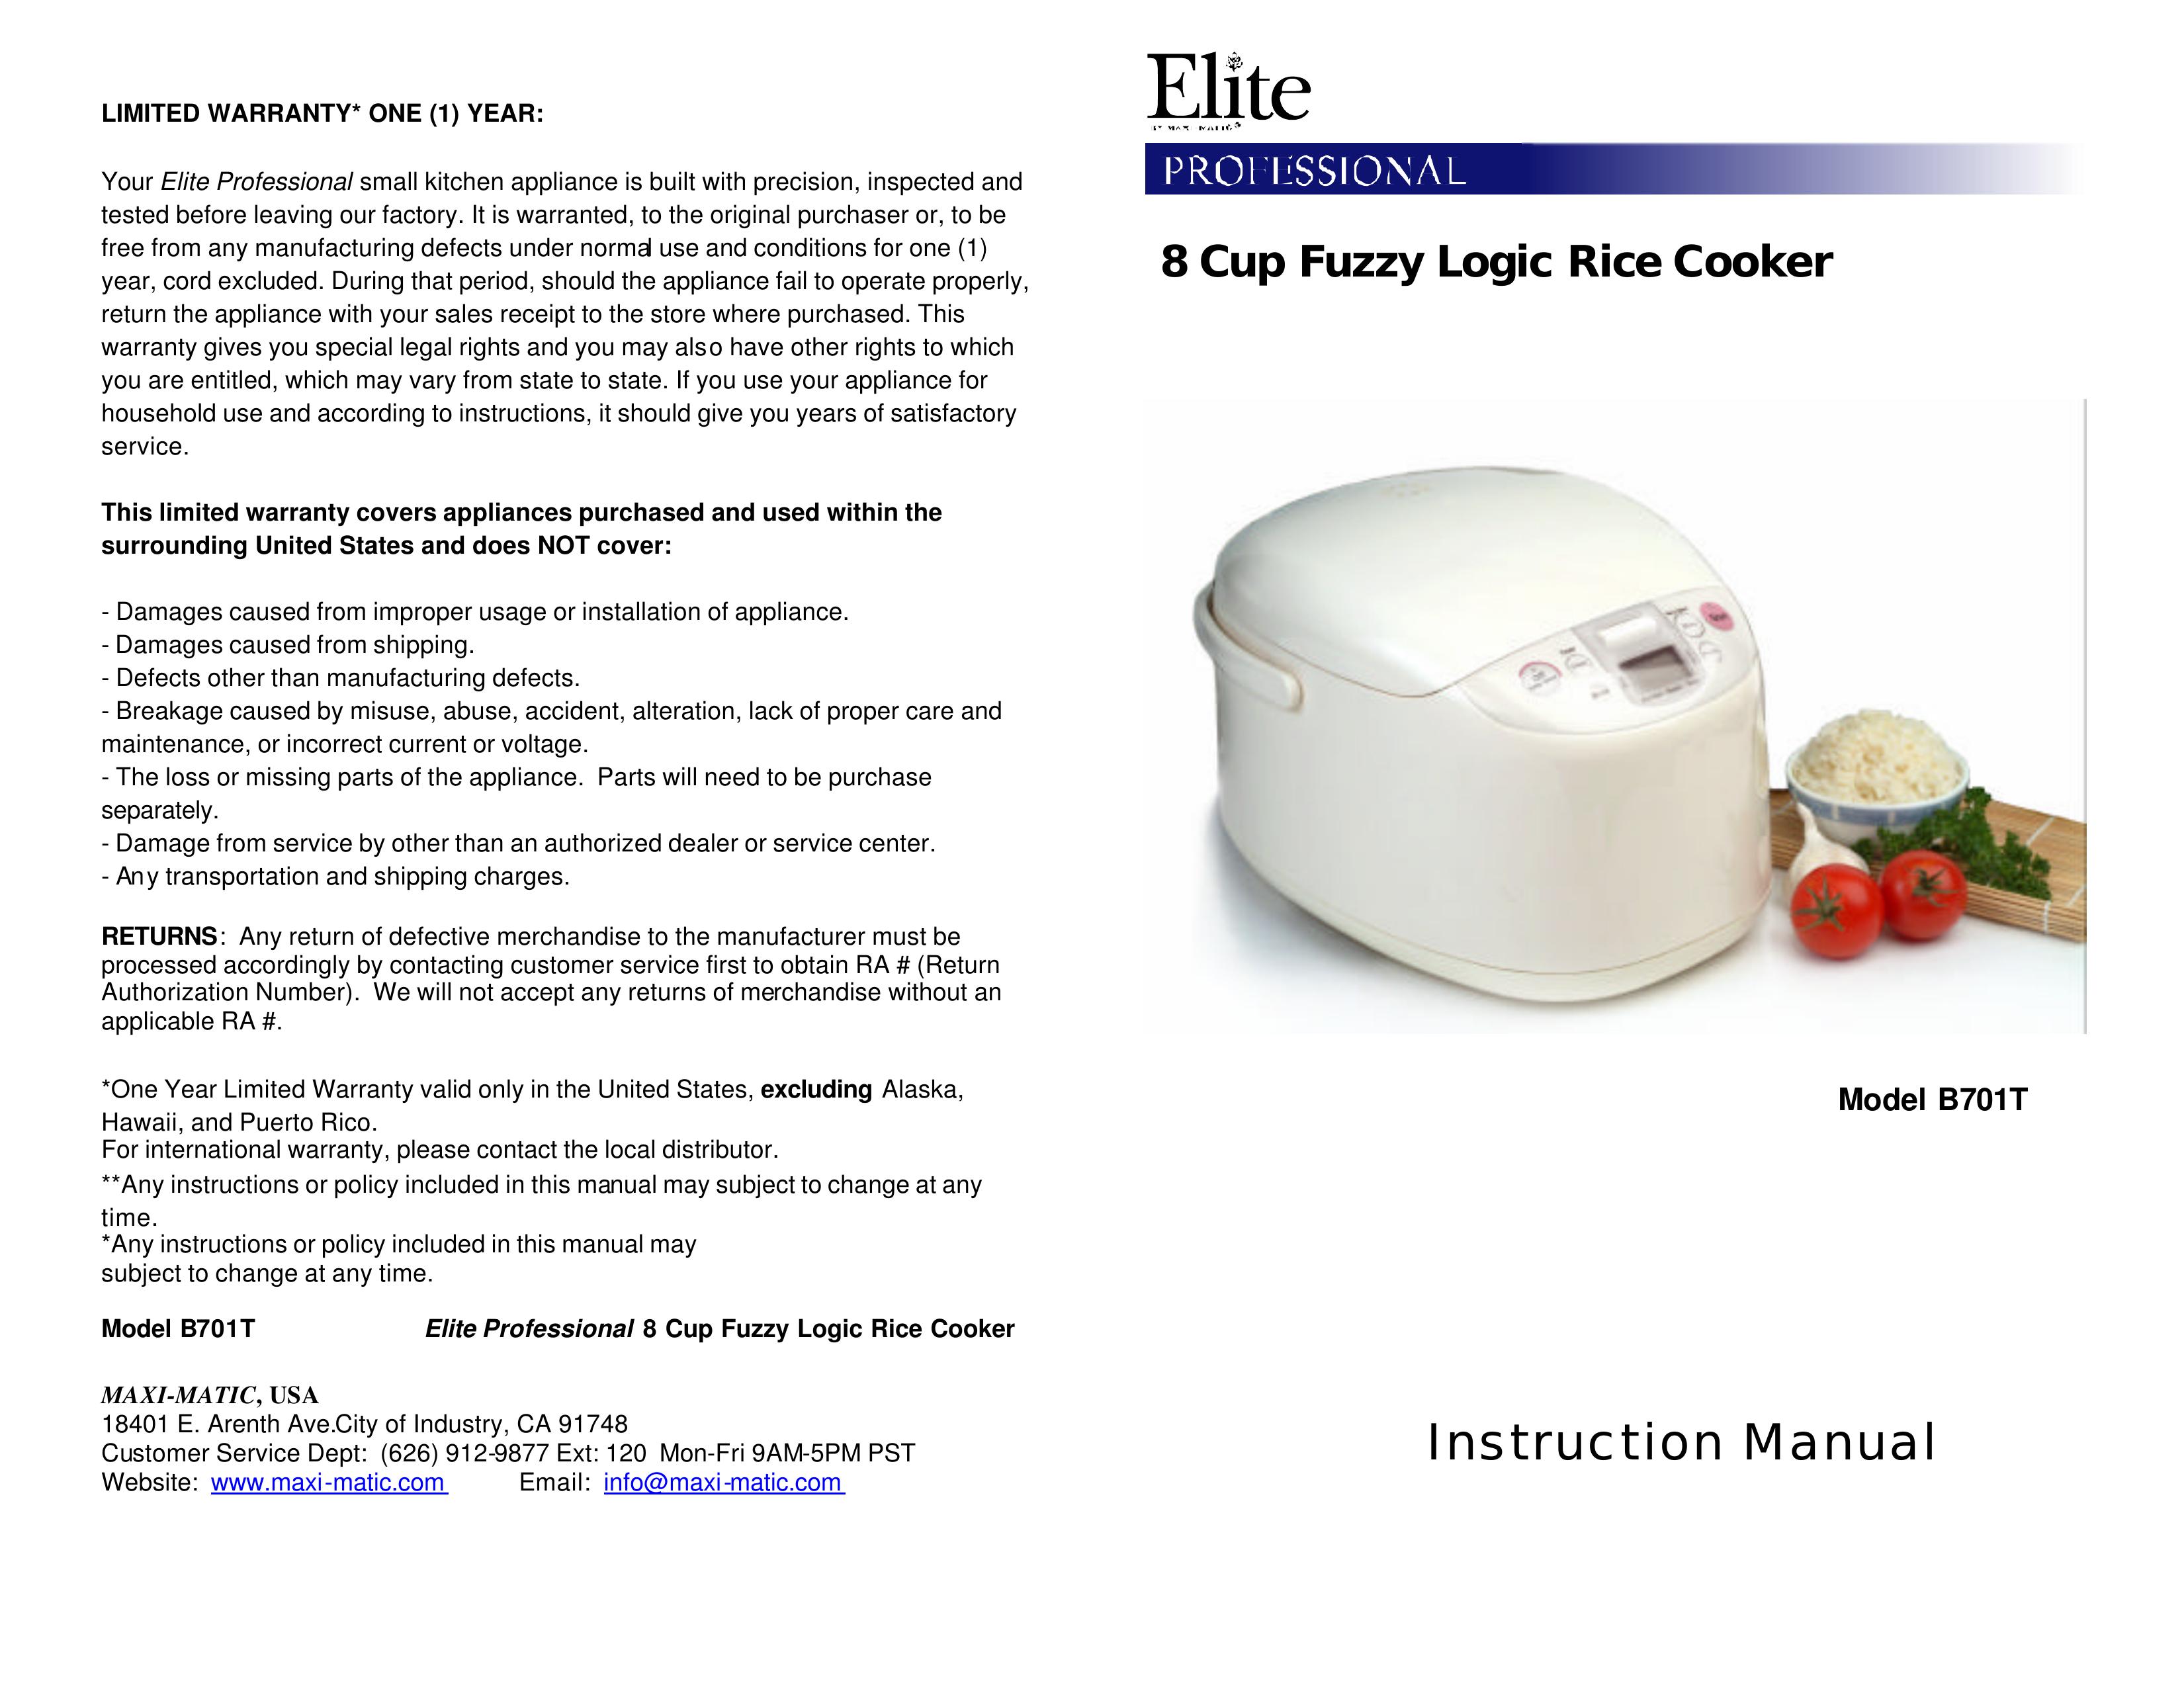 Maximatic B701T Rice Cooker User Manual